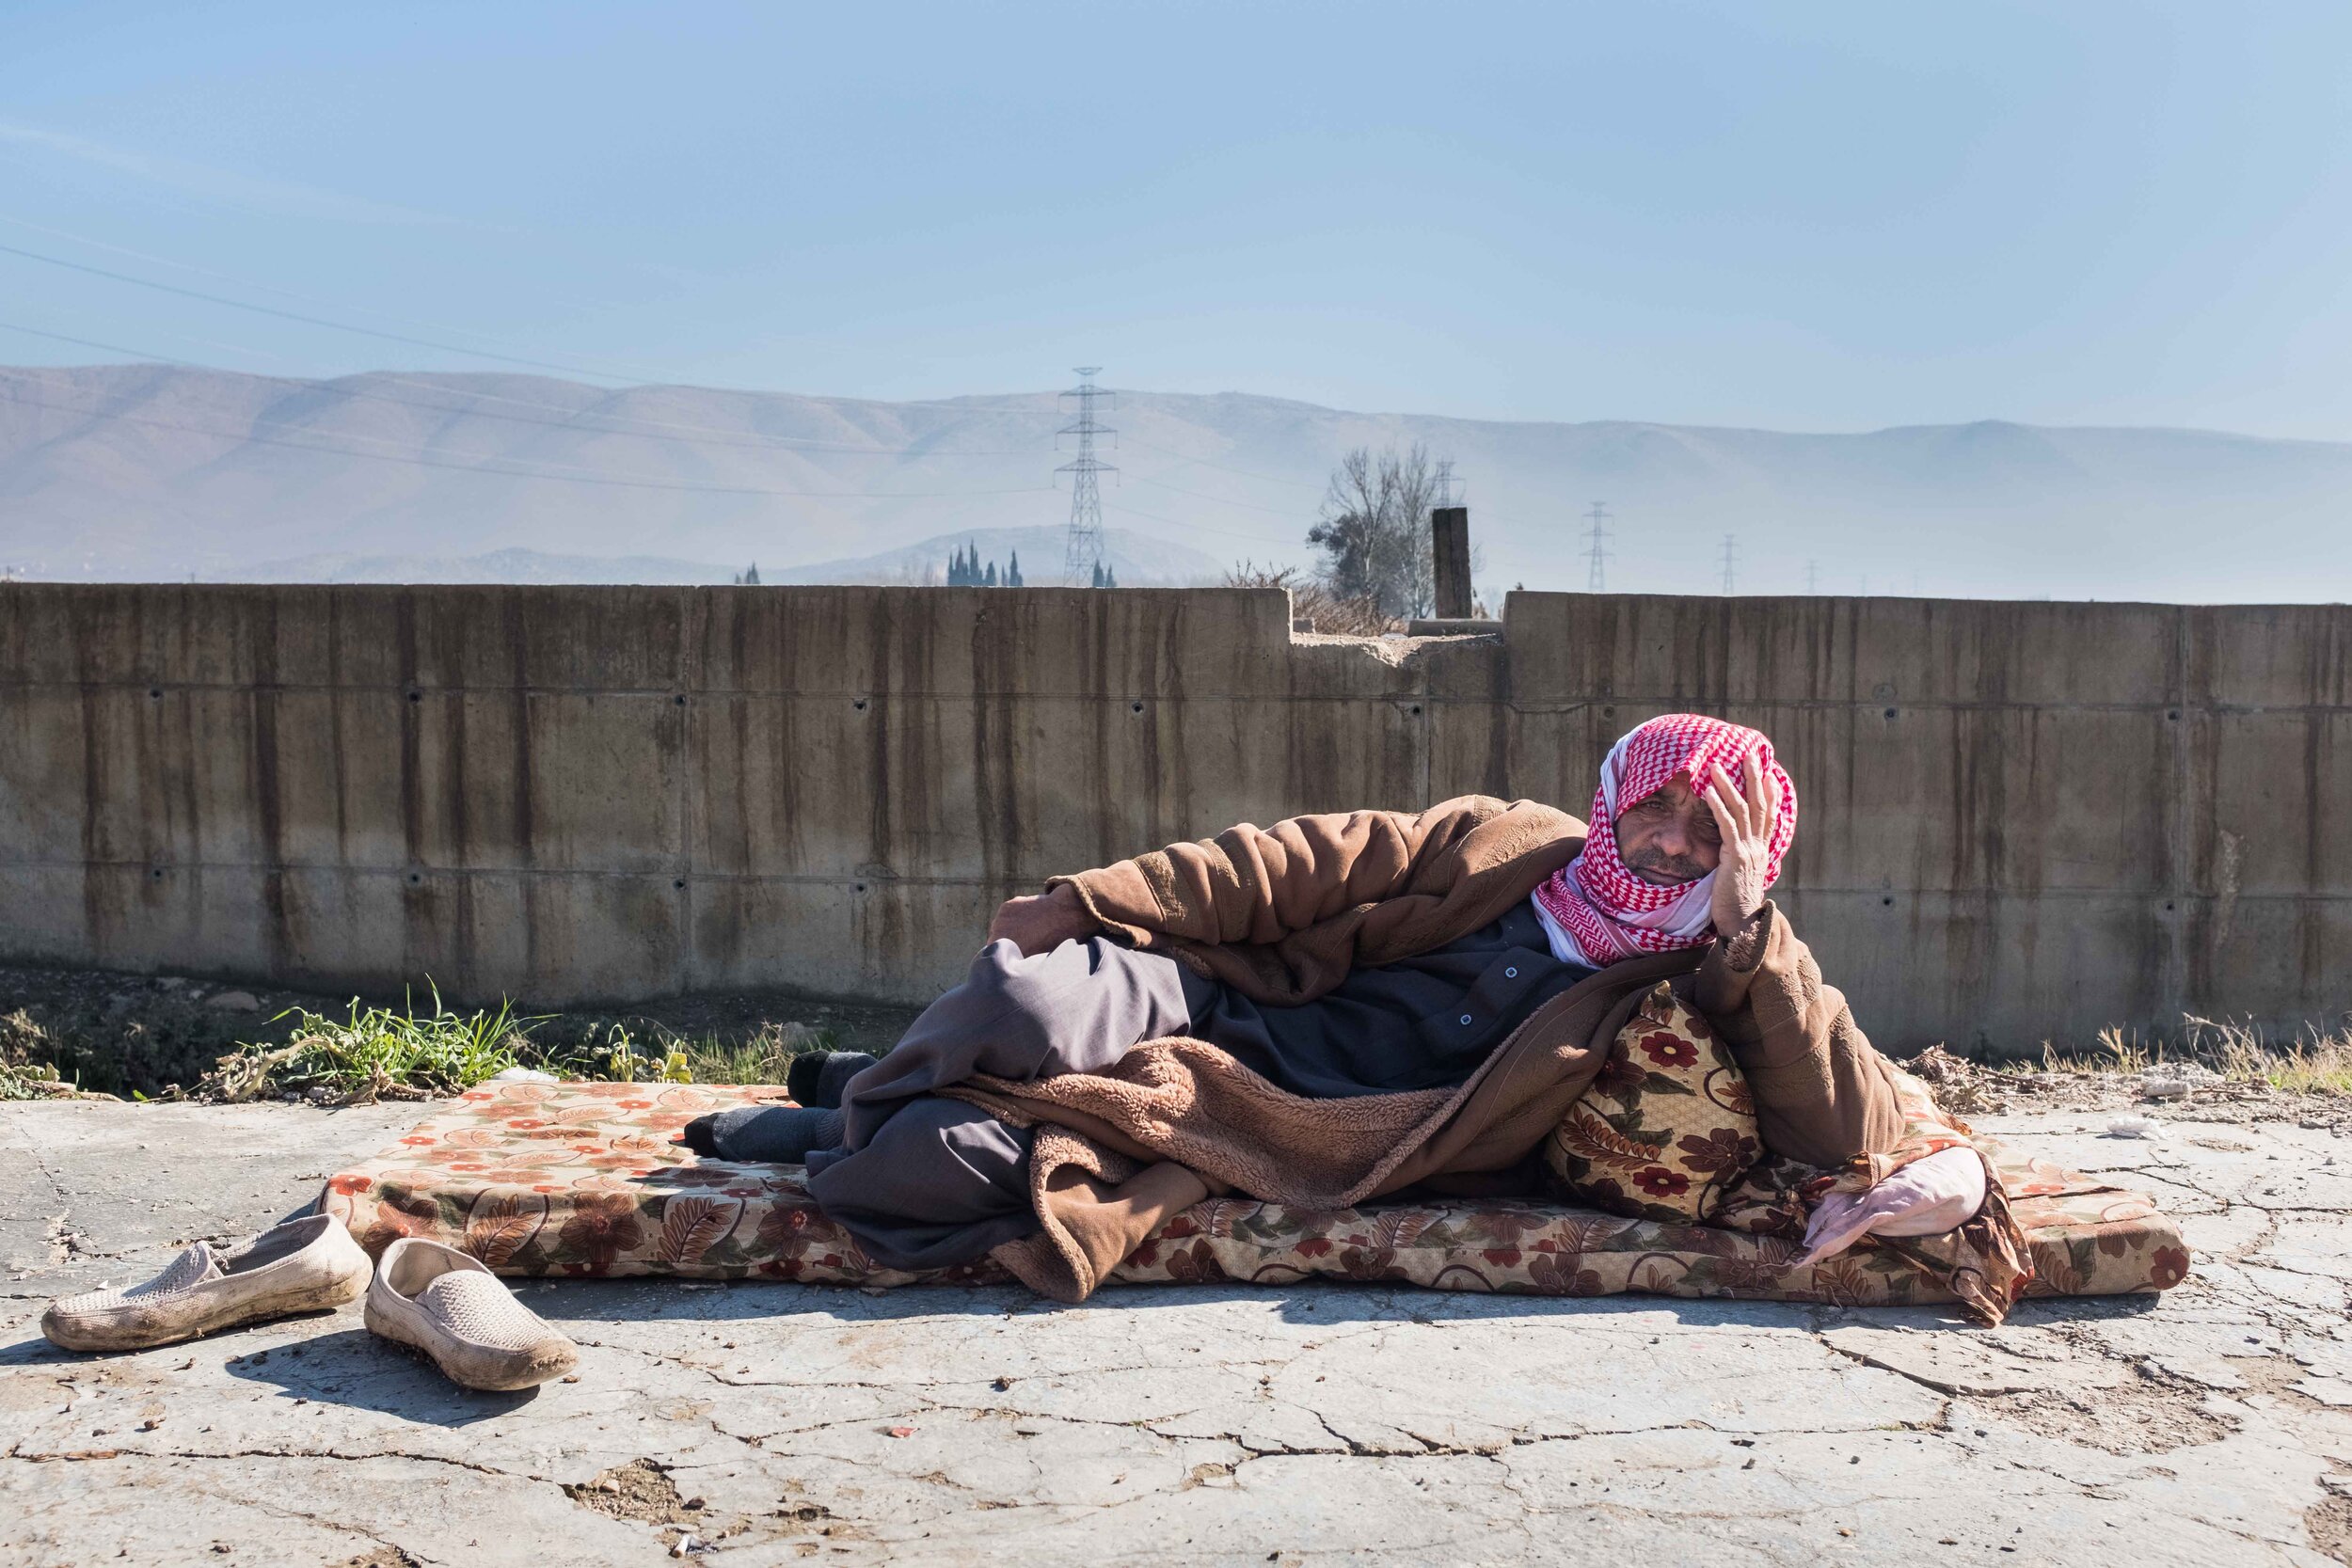  Ahmad has been staying in a camp in the Beqaa Valley, East Lebanon, since 2012. Despite living only about 10 kilometres away from his home country, Syria, and seeing its mountains daily (behind him in the photo), the return perspectives that he face